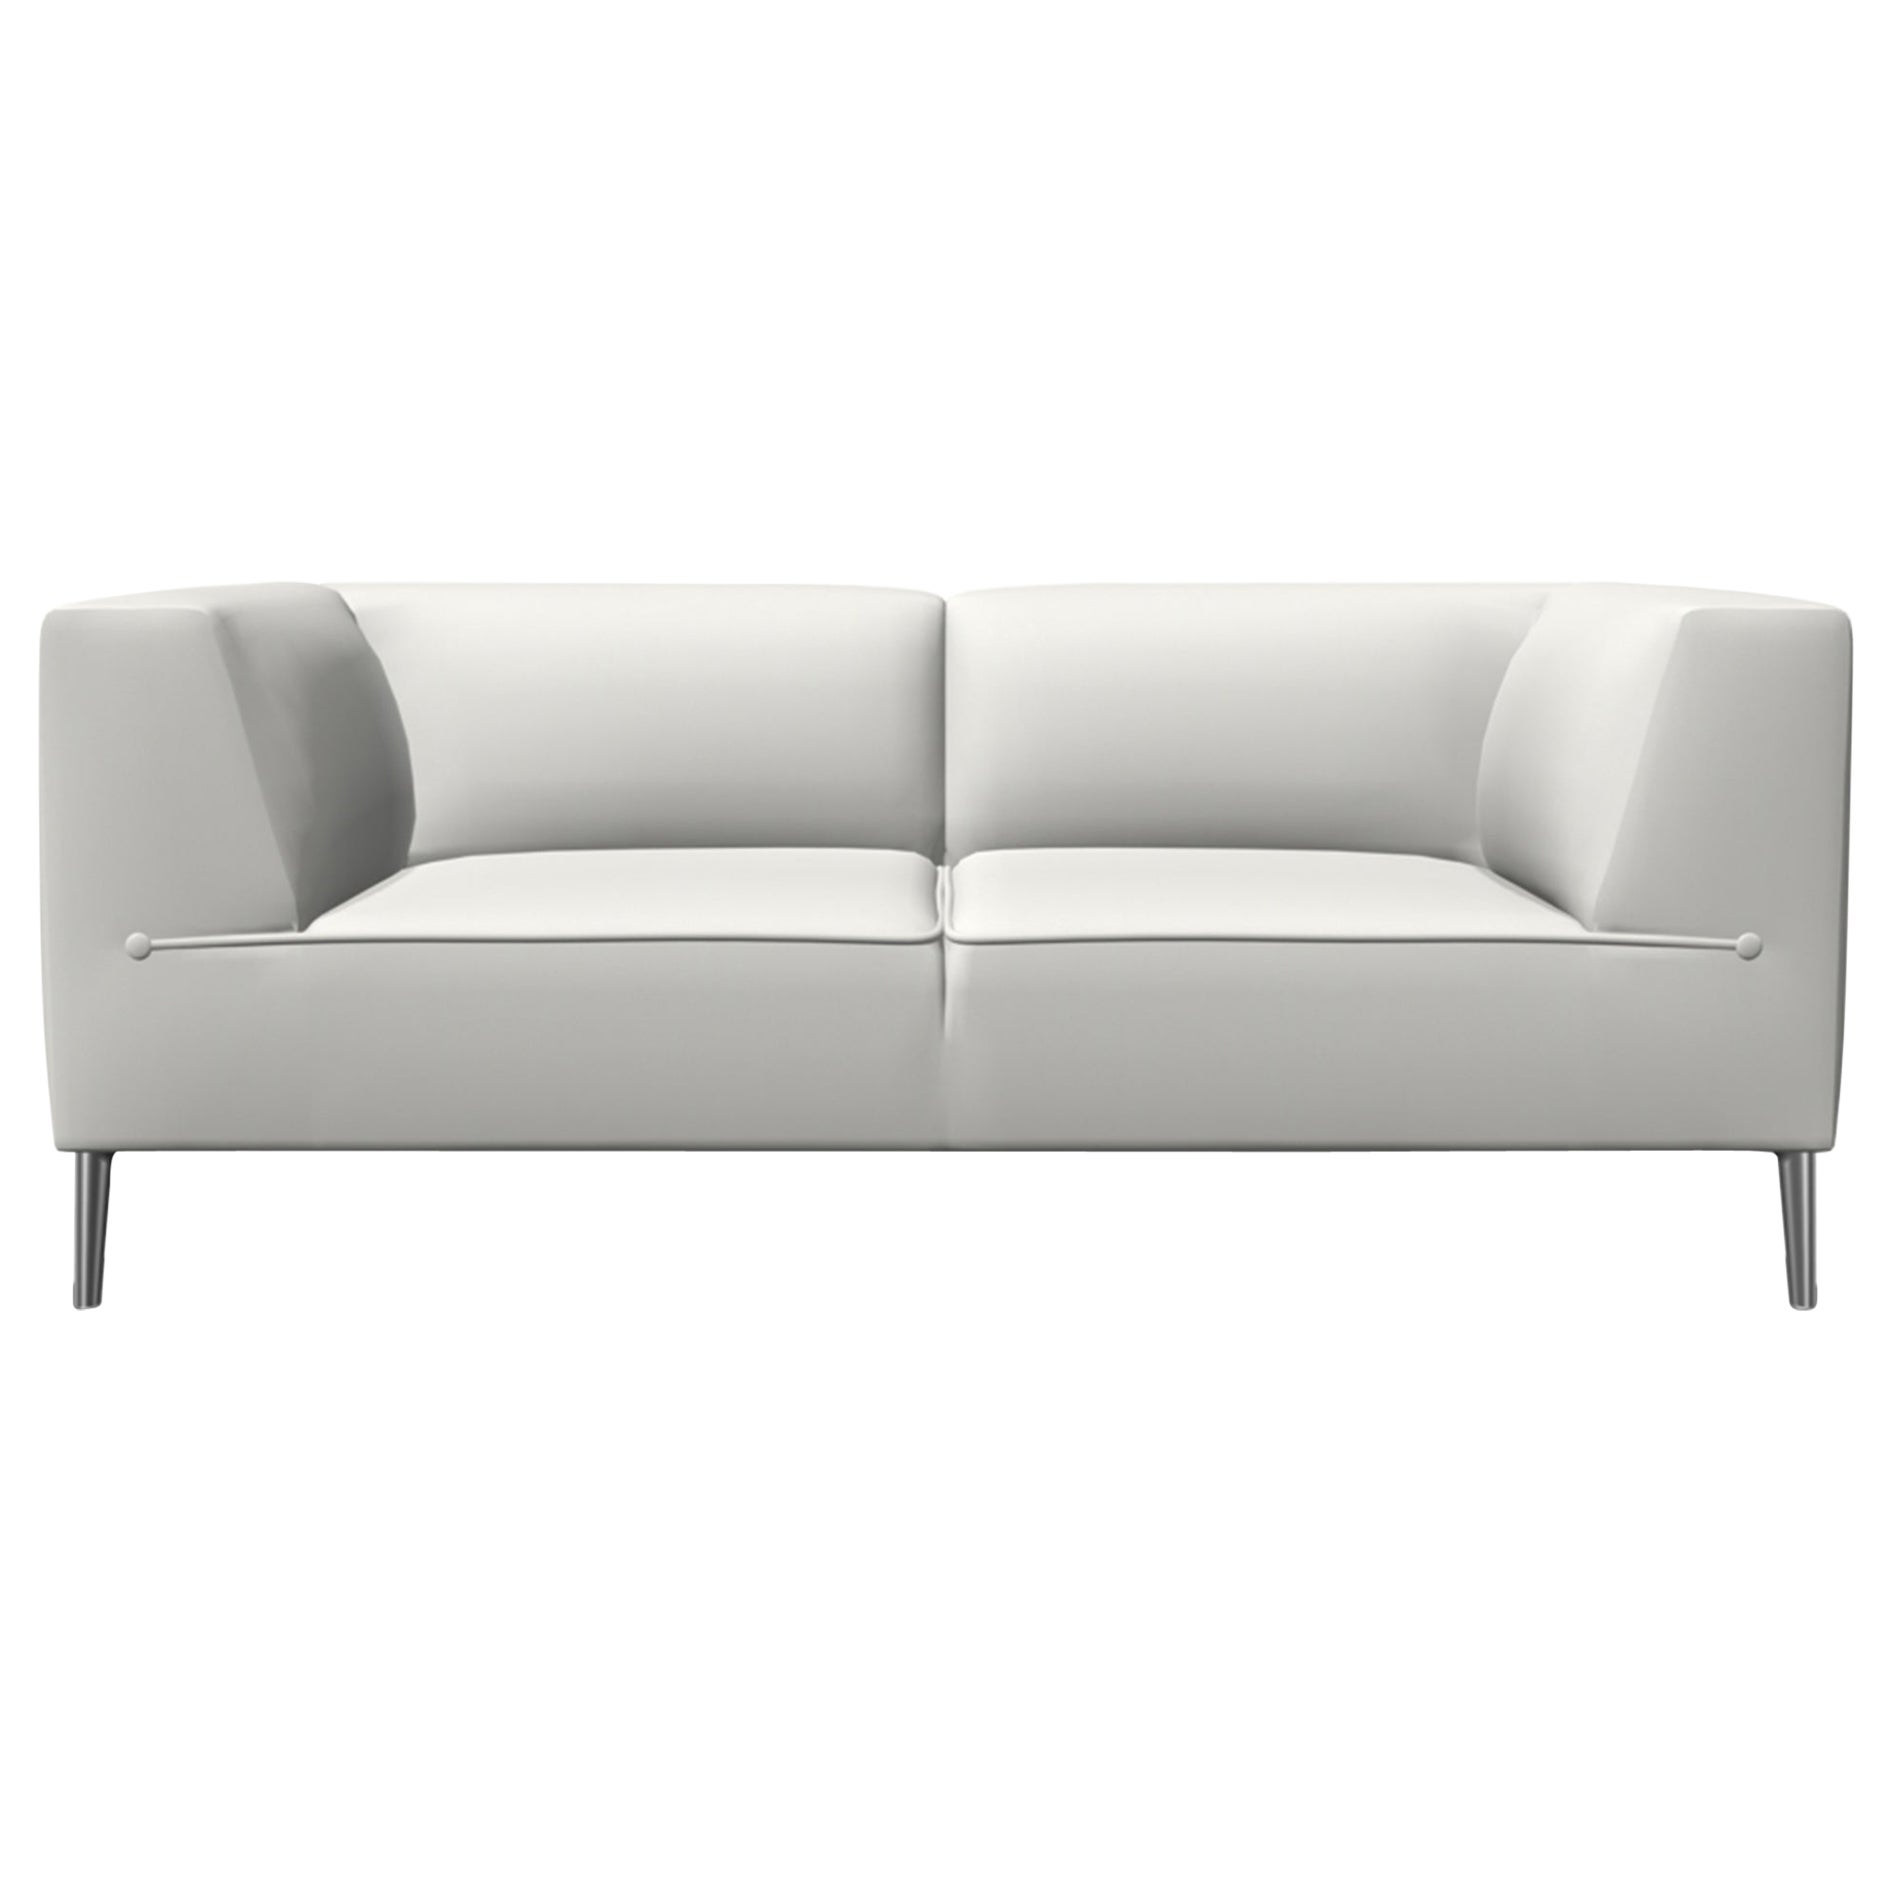 Moooi Double Seat Sofa So Good in White Upholstery with Polished Aluminum Feet